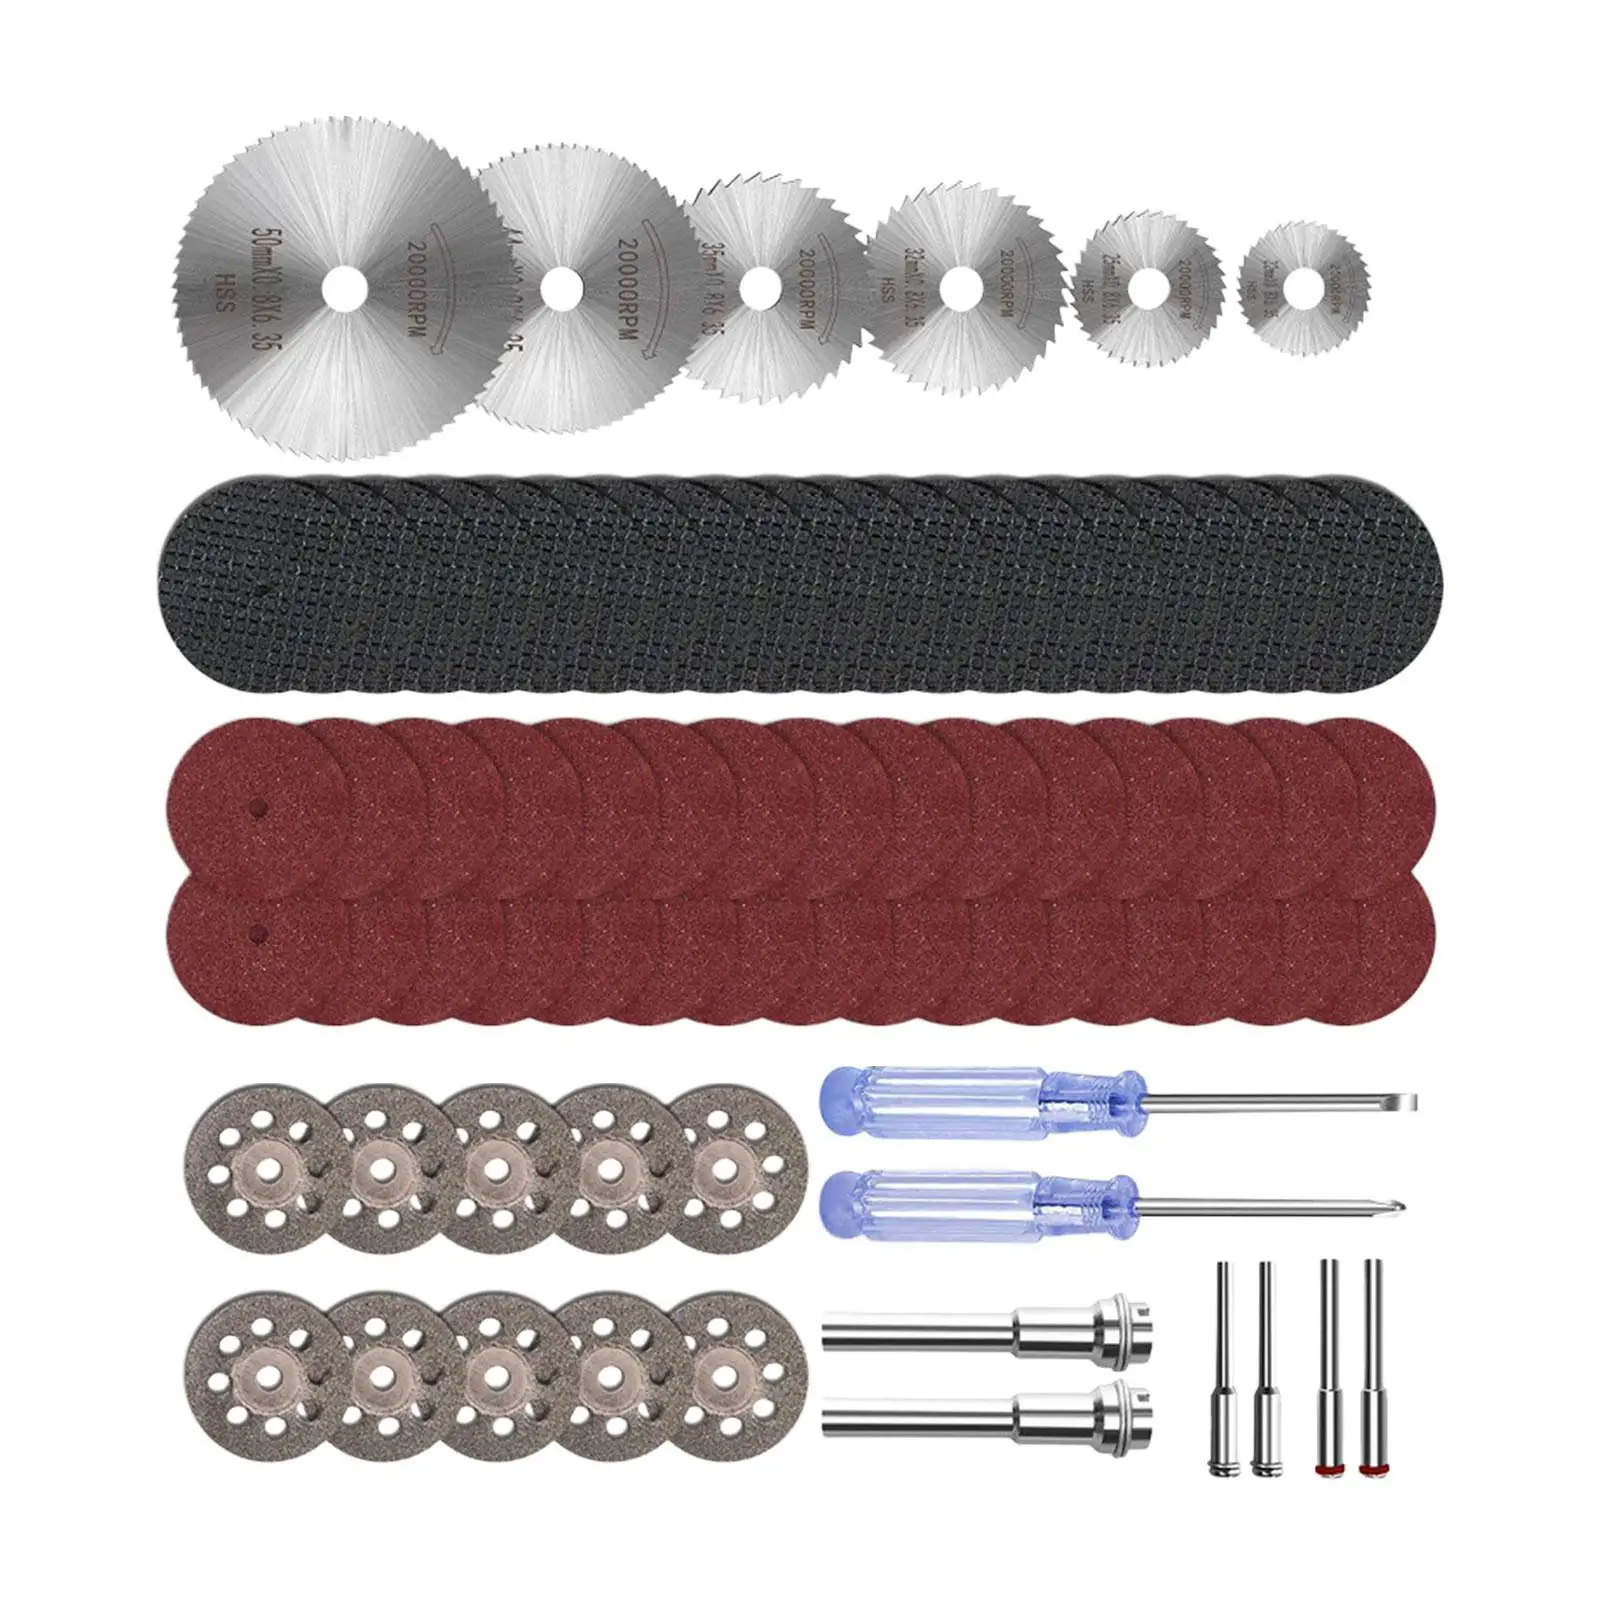 74 Pieces Diamond Cutting Wheel Kits for Engineered Wood Cement Backer Board